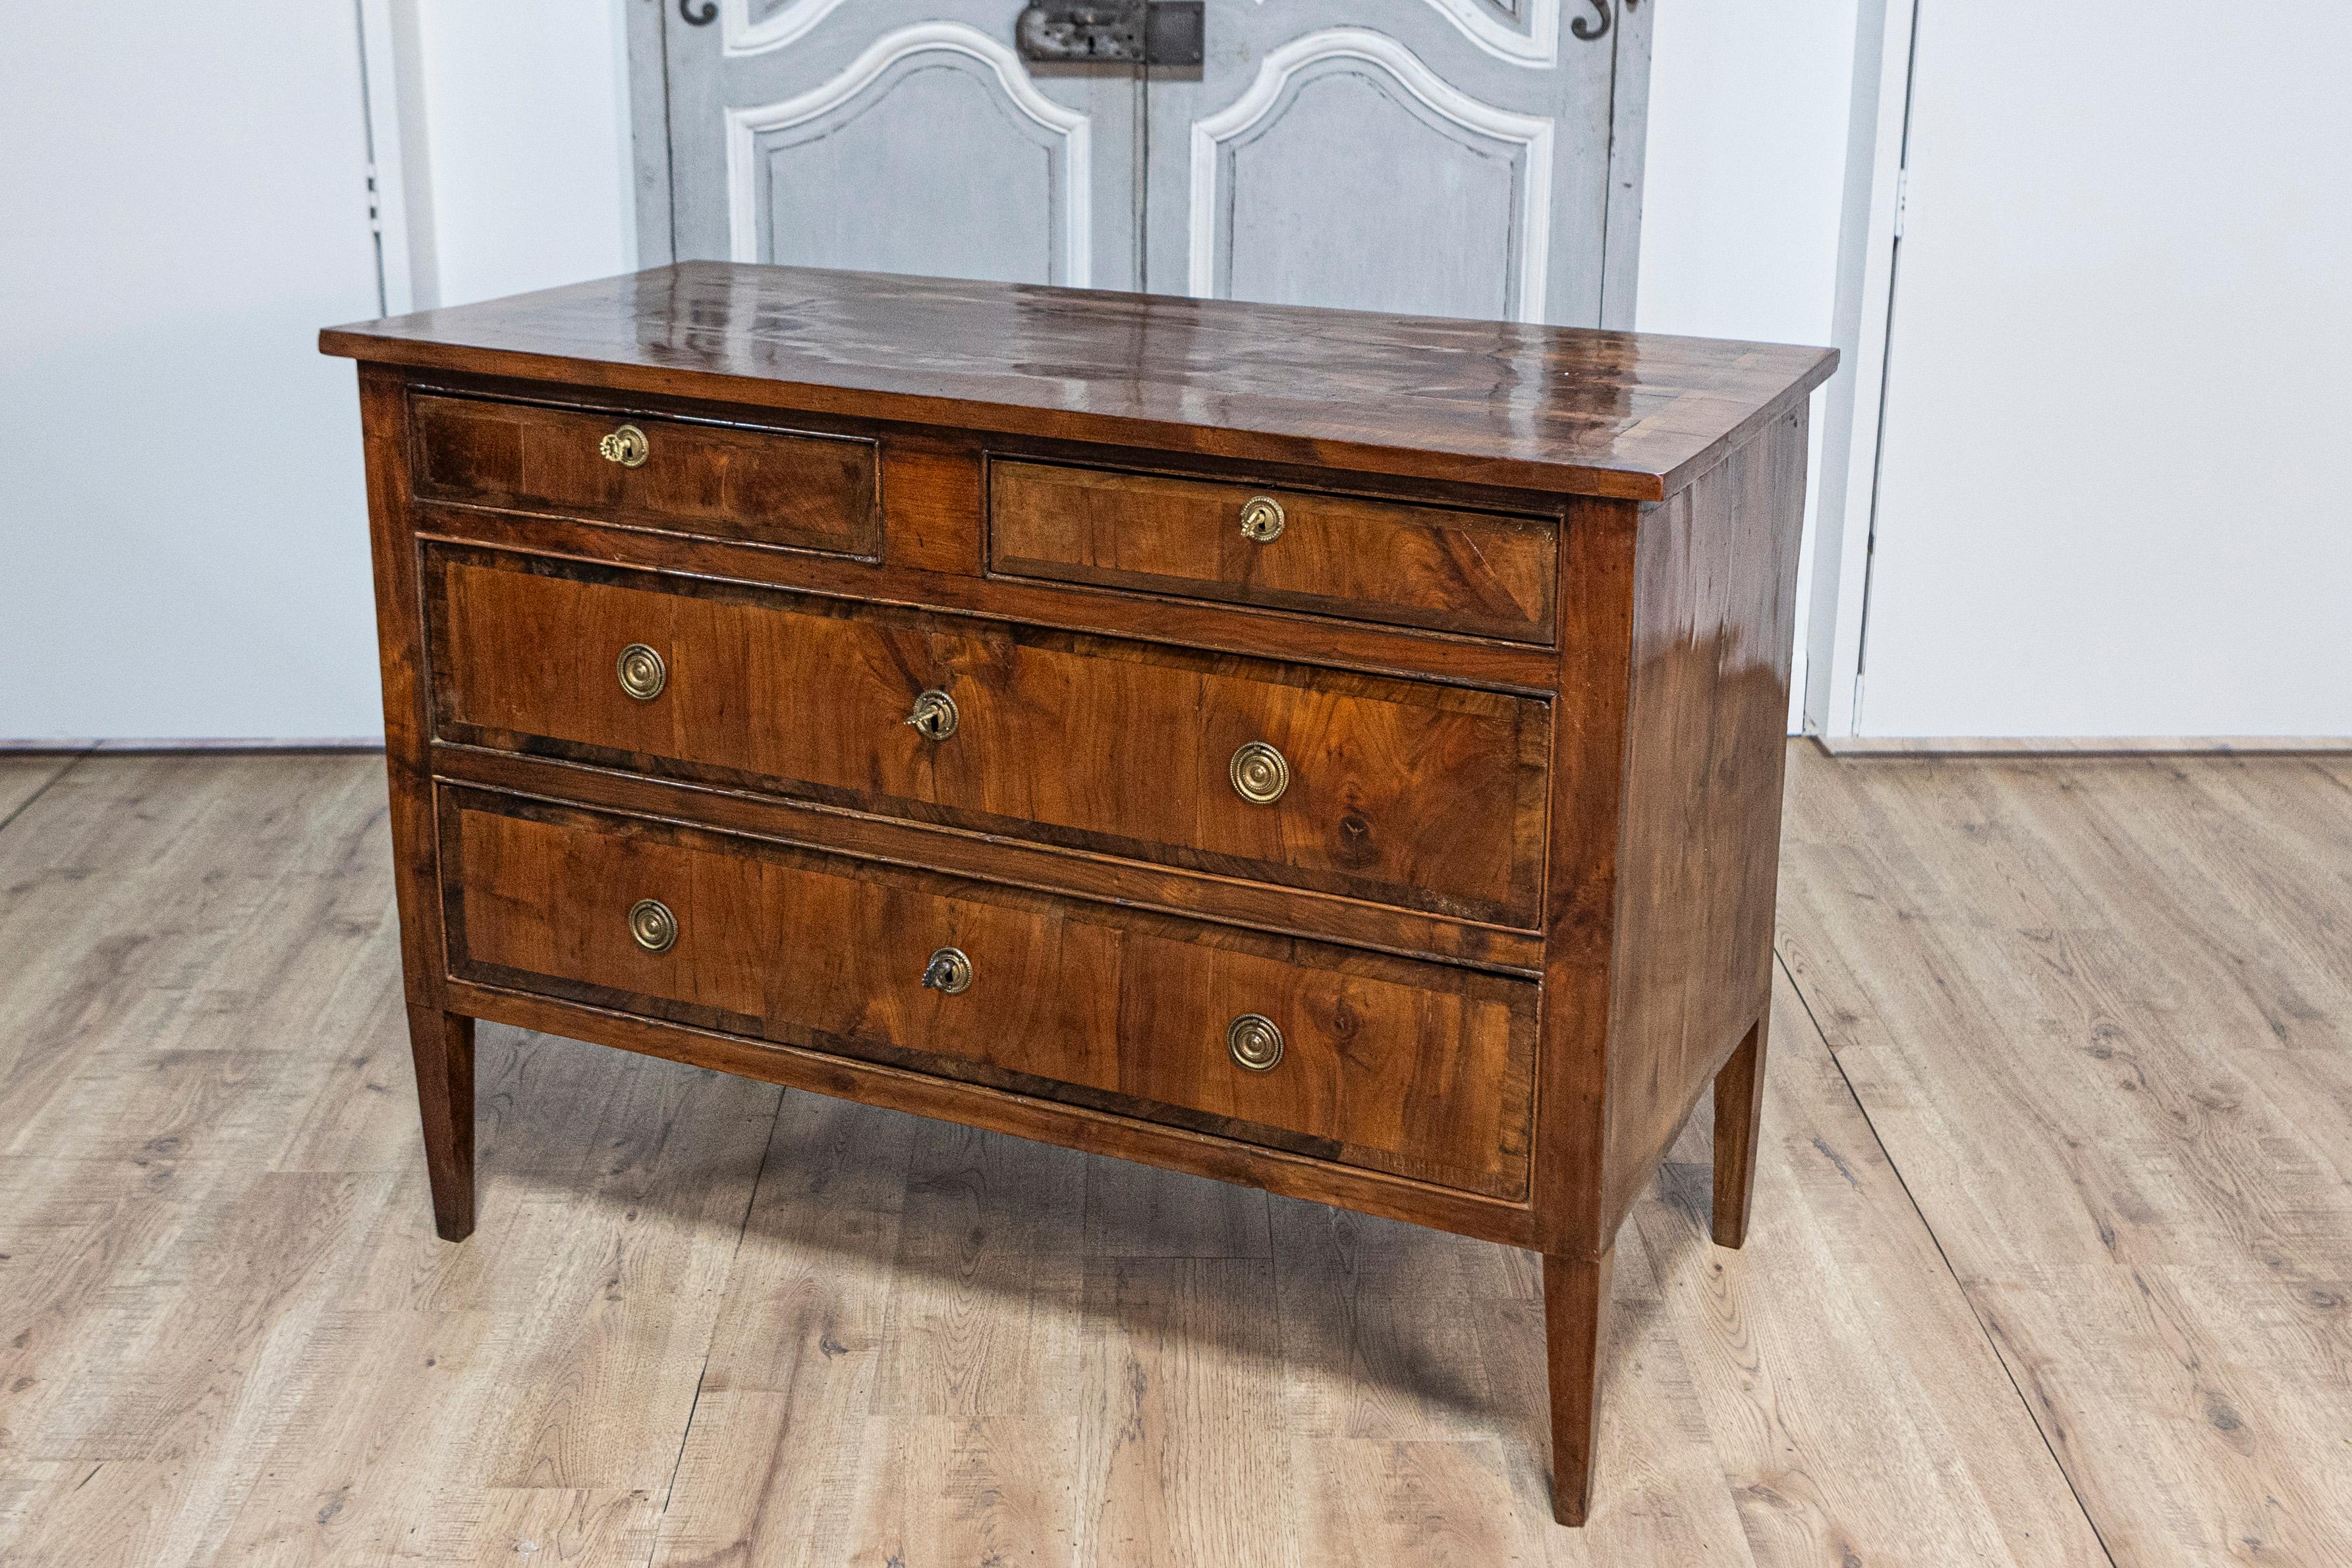 Italian Neoclassical Period 18th Century Walnut Commode with Four Drawers For Sale 9